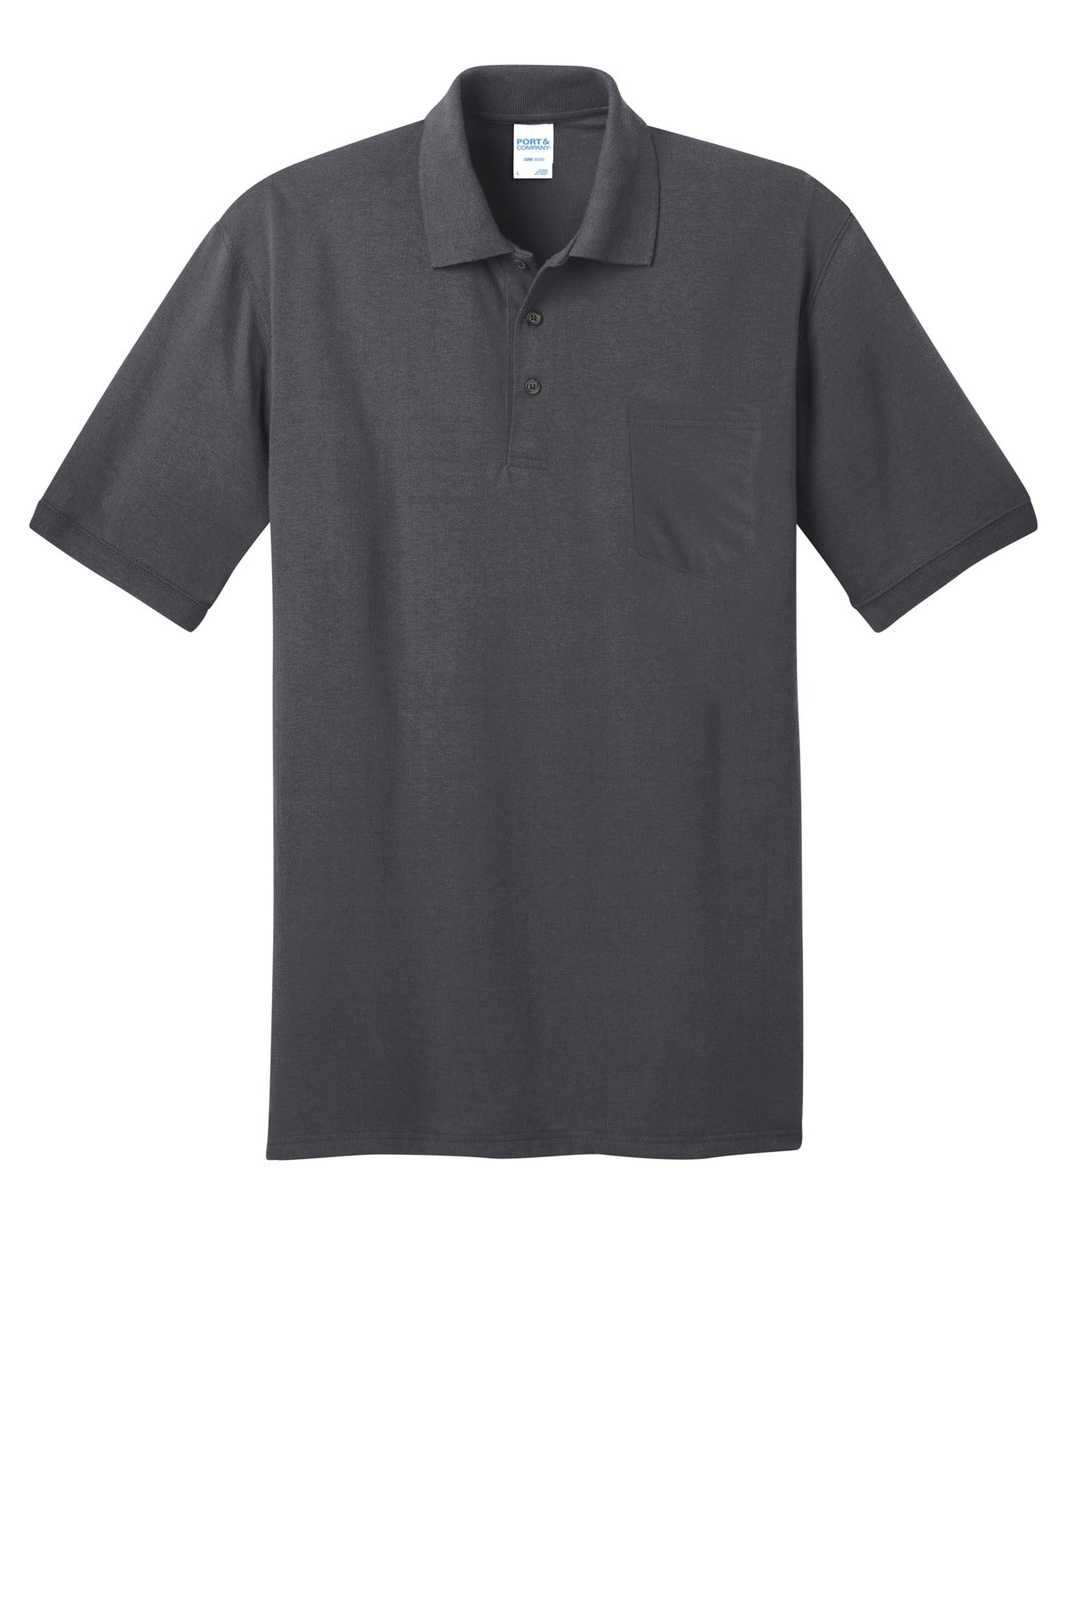 Port &amp; Company KP55P Core Blend Jersey Knit Pocket Polo - Charcoal - HIT a Double - 5